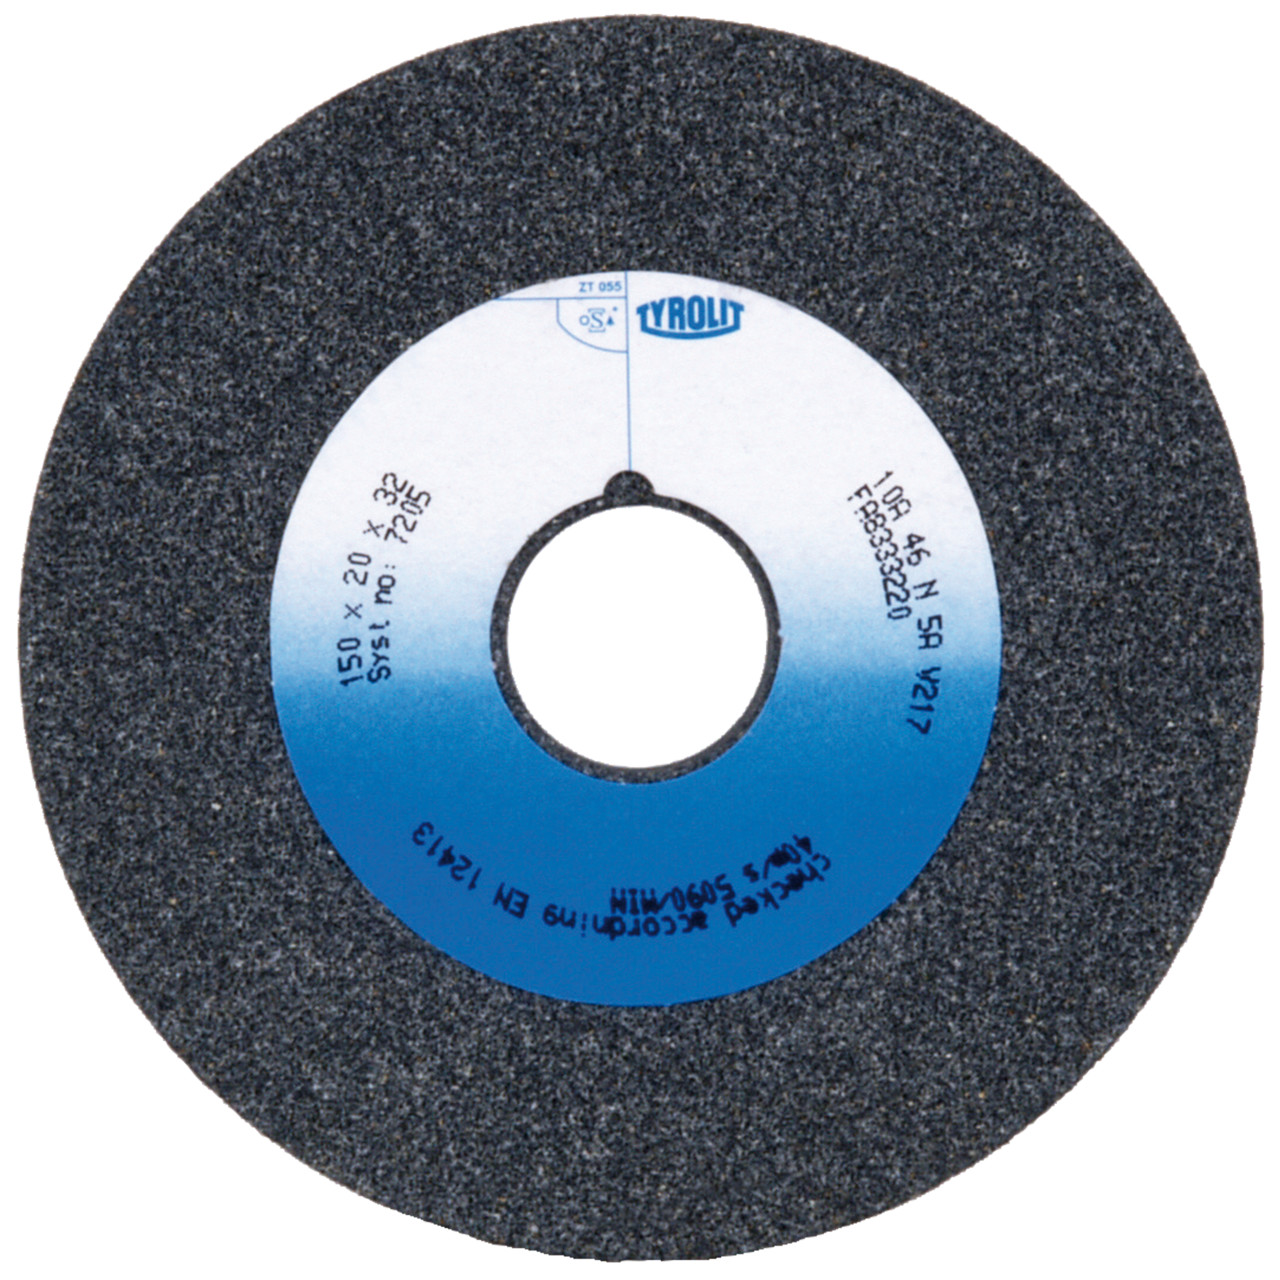 TYROLIT conventional ceramic grinding wheels DxDxH 150x25x32 For unalloyed and low-alloy steels, shape: 1, Art. 52223